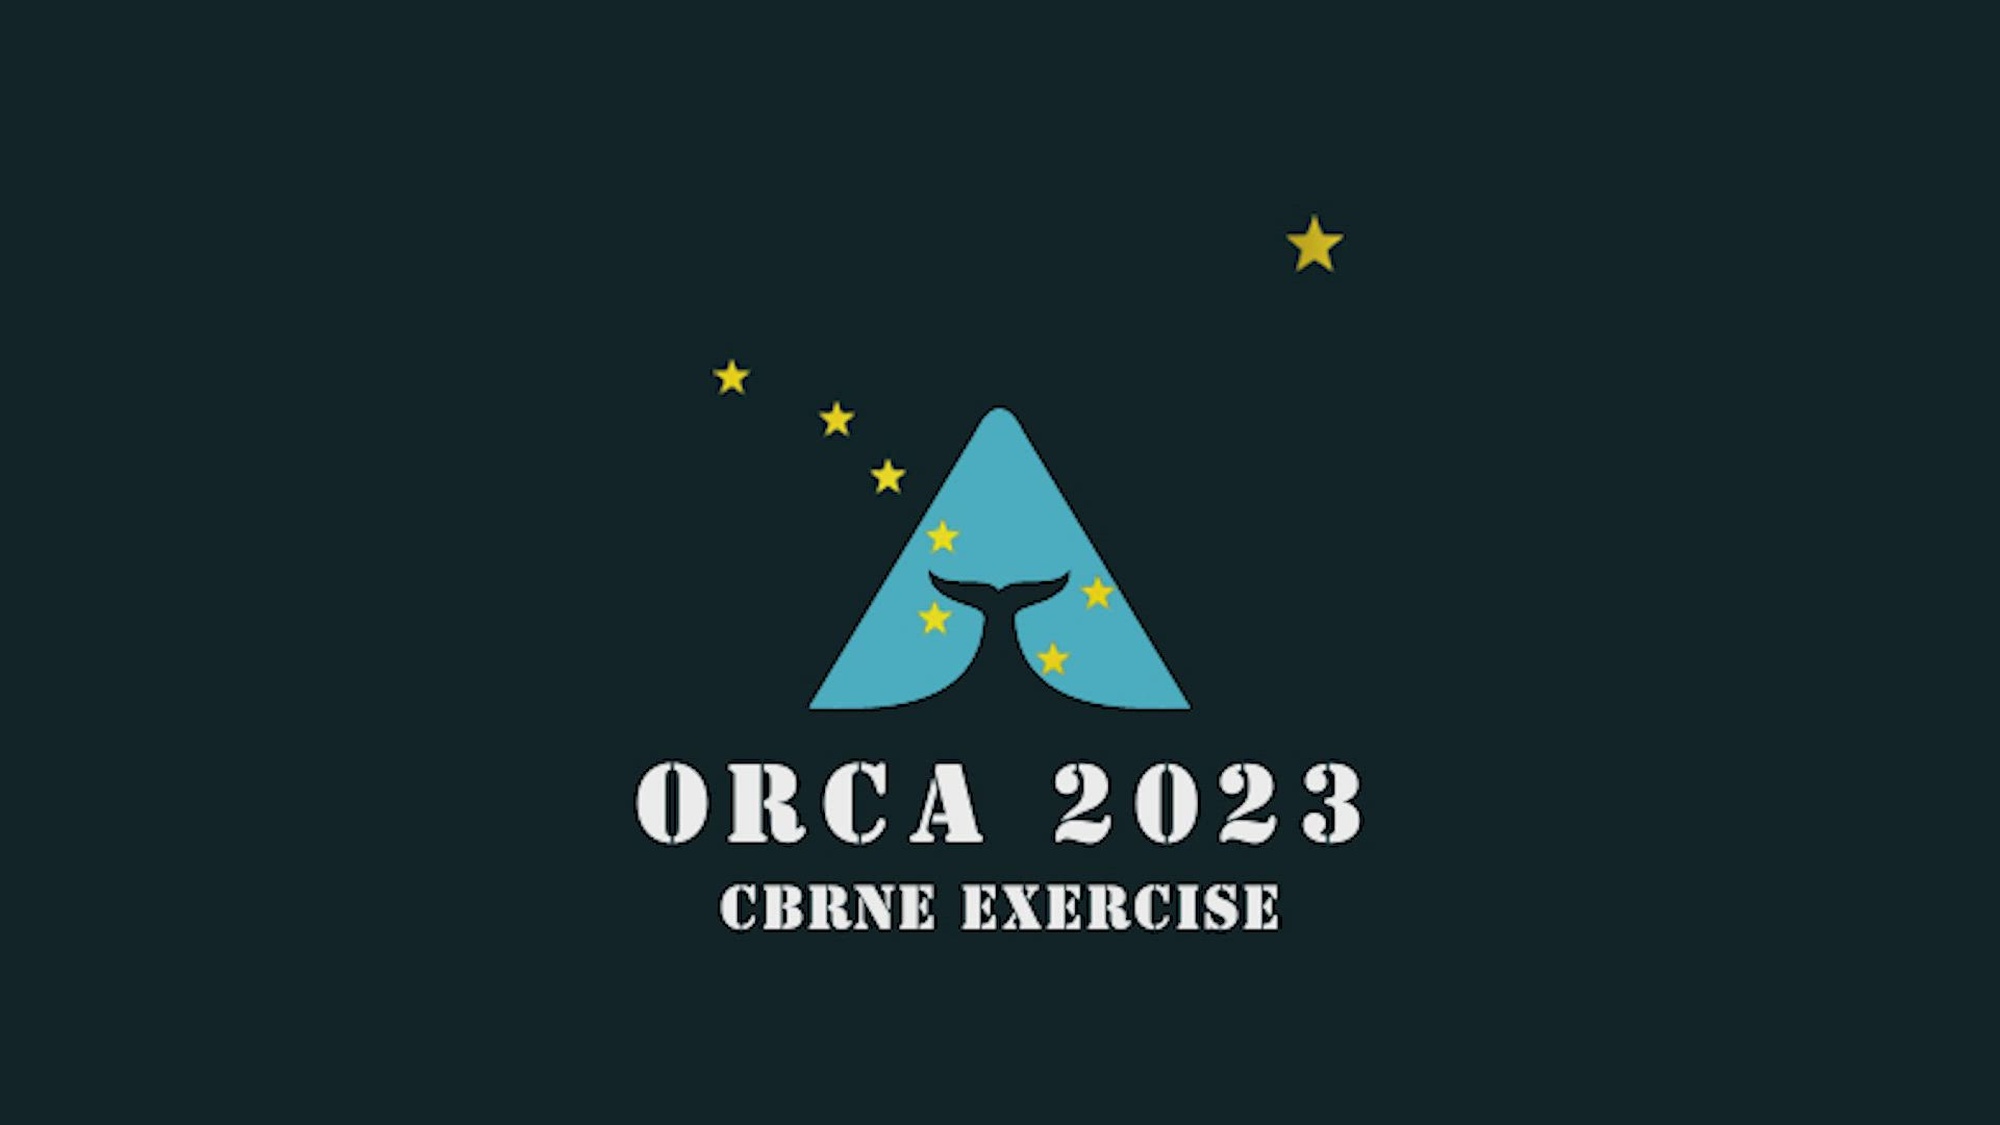 The Alaska National Guard hosted exercise ORCA 2023, an interagency, comprehensive disaster drill, in Anchorage, the Matanuska-Susitna Borough, Nome, and Kotzebue, June 12-15, 2023. The multi-agency chemical, biological, radiological, nuclear, and explosive exercise provides an opportunity for participating agencies to assess and enhance their capabilities, refine interagency coordination, and ensure a timely and efficient response during emergencies.